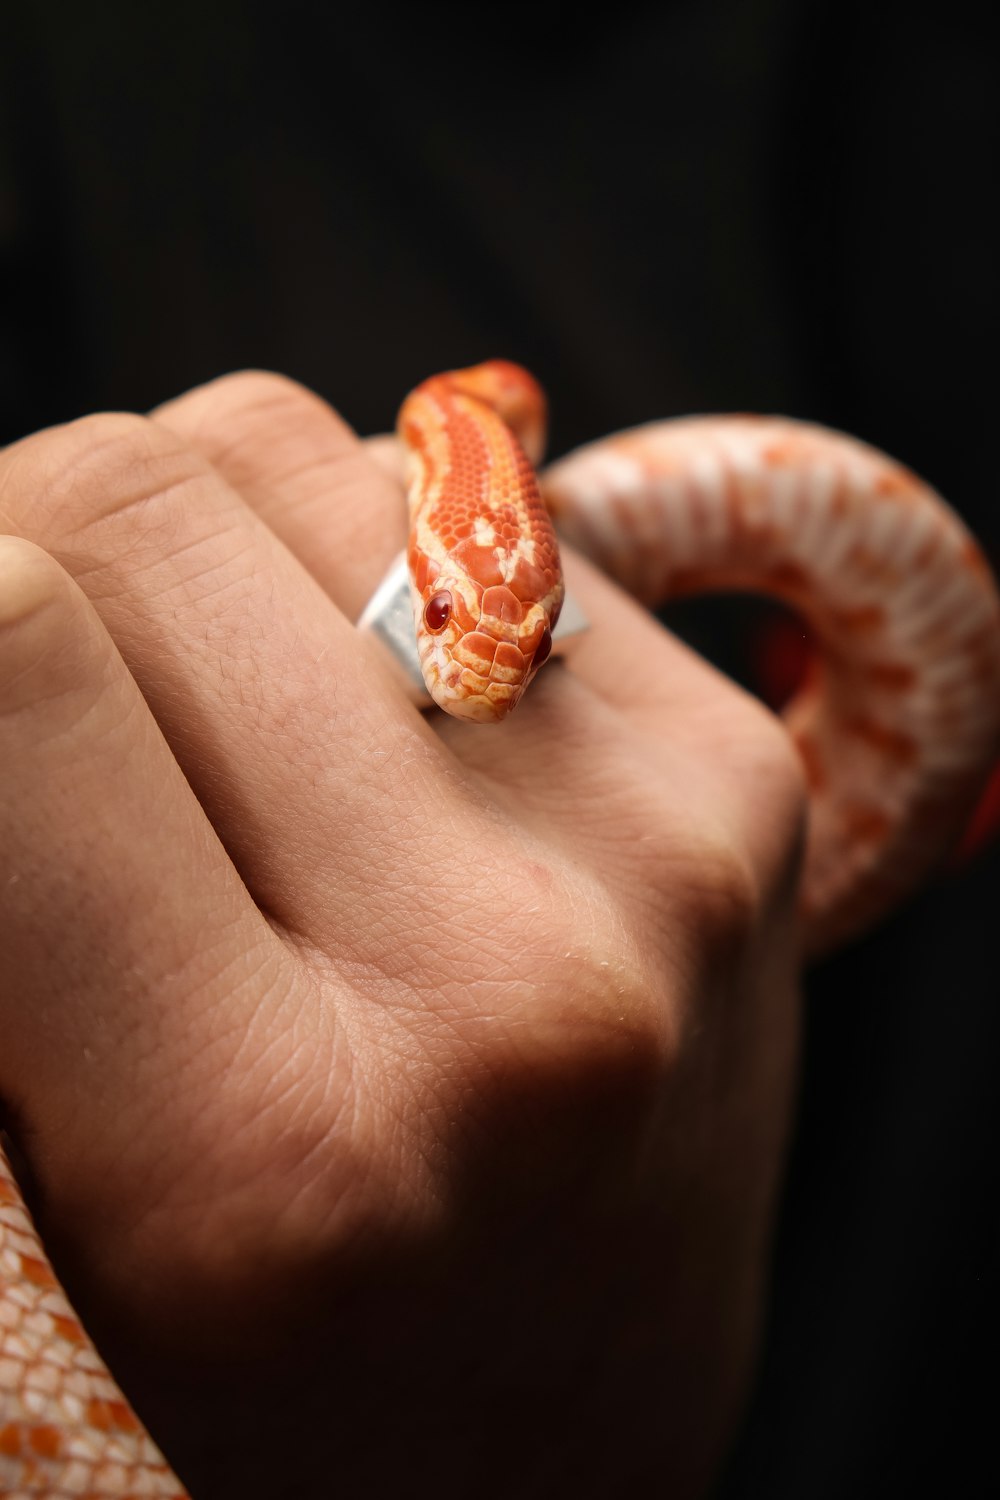 a hand holding a small orange and white snake